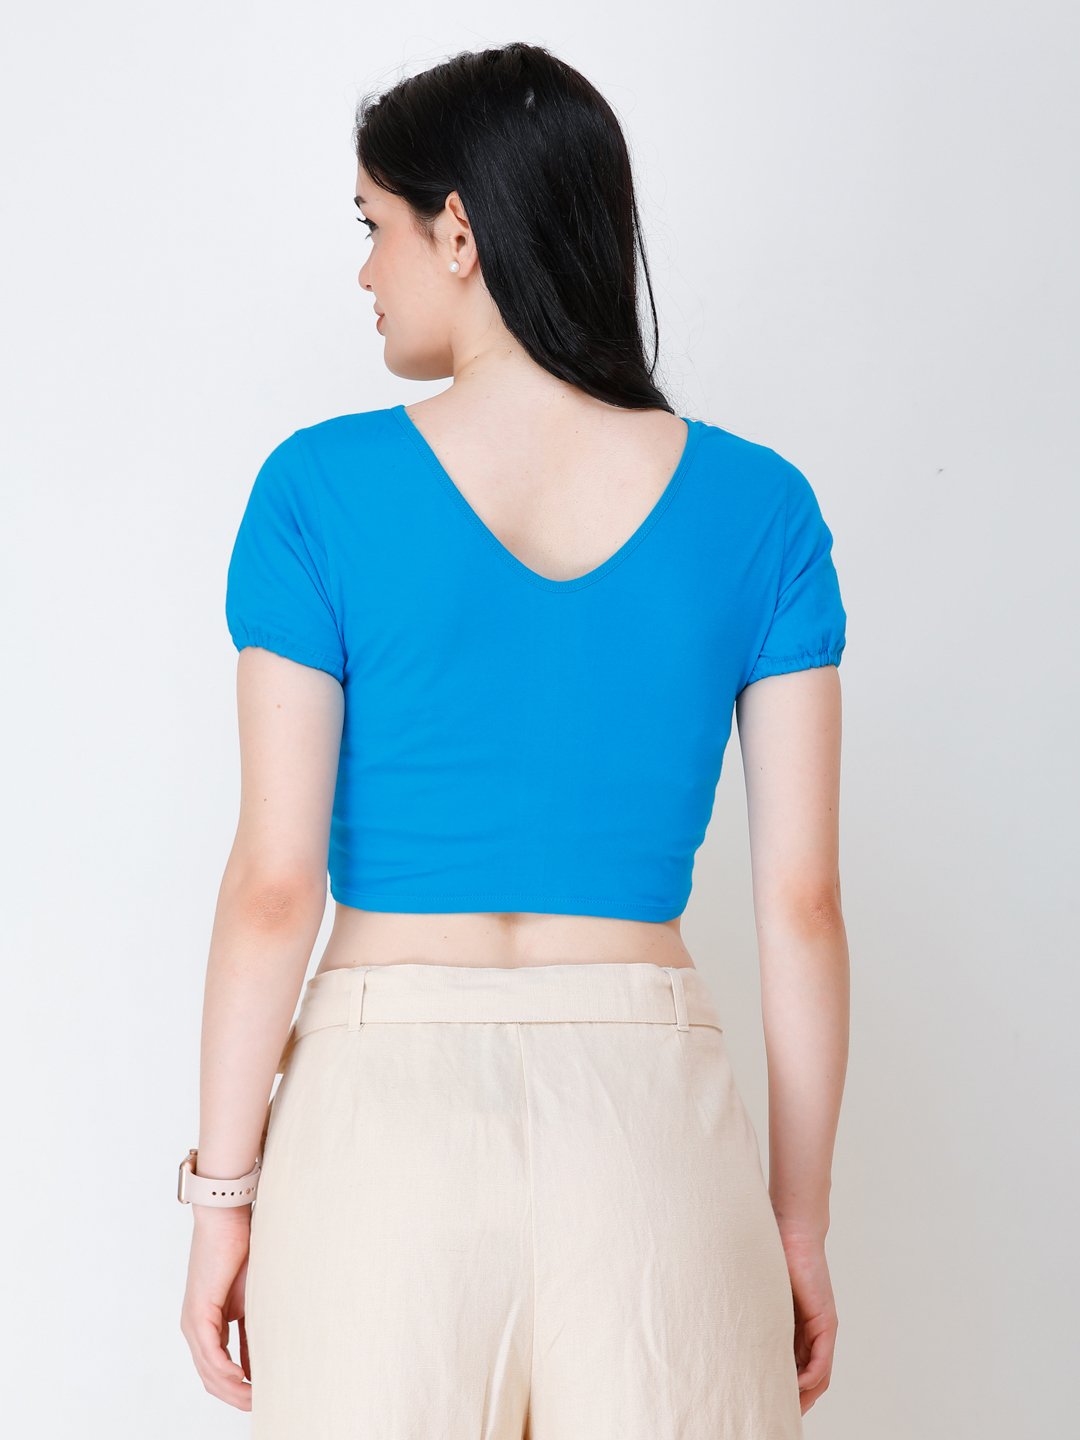 SCORPIUS Turquoise Blue styled front crop top